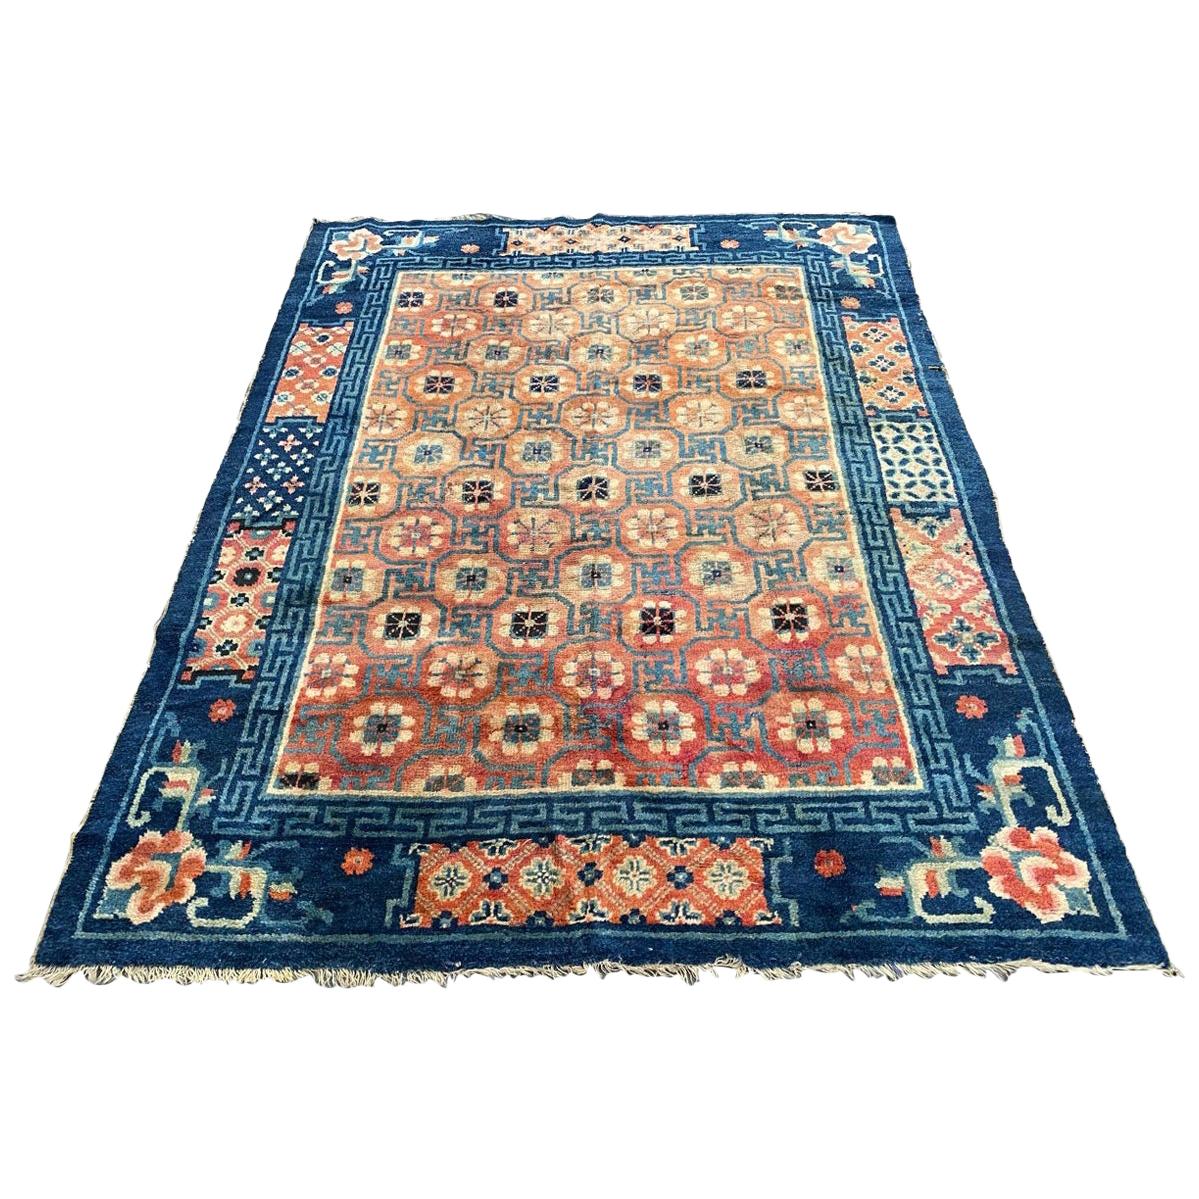 Bobyrug’s Very Beautiful Antique Chinese Beijing Rug